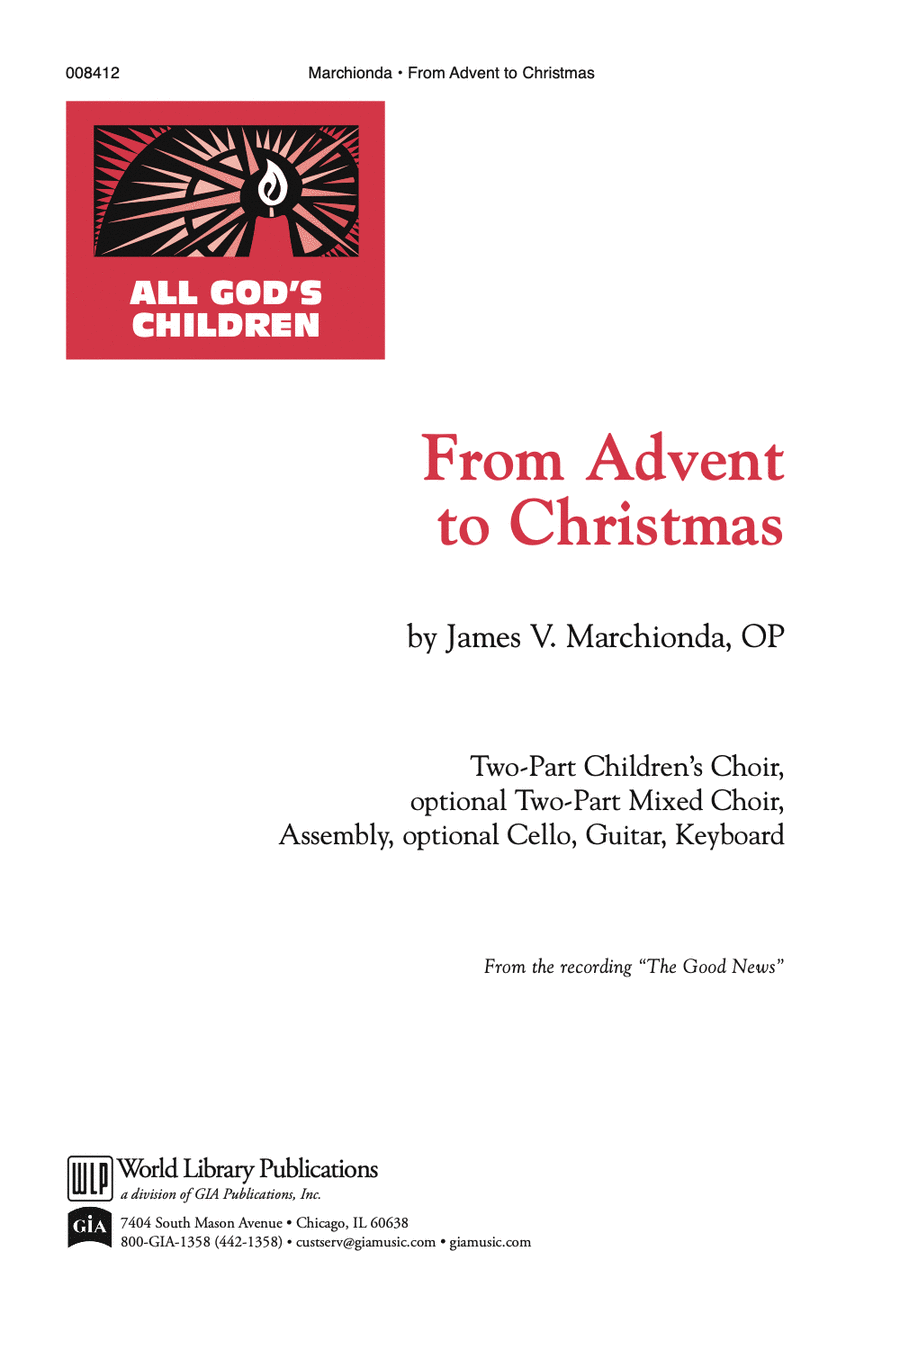 From Advent to Christmas